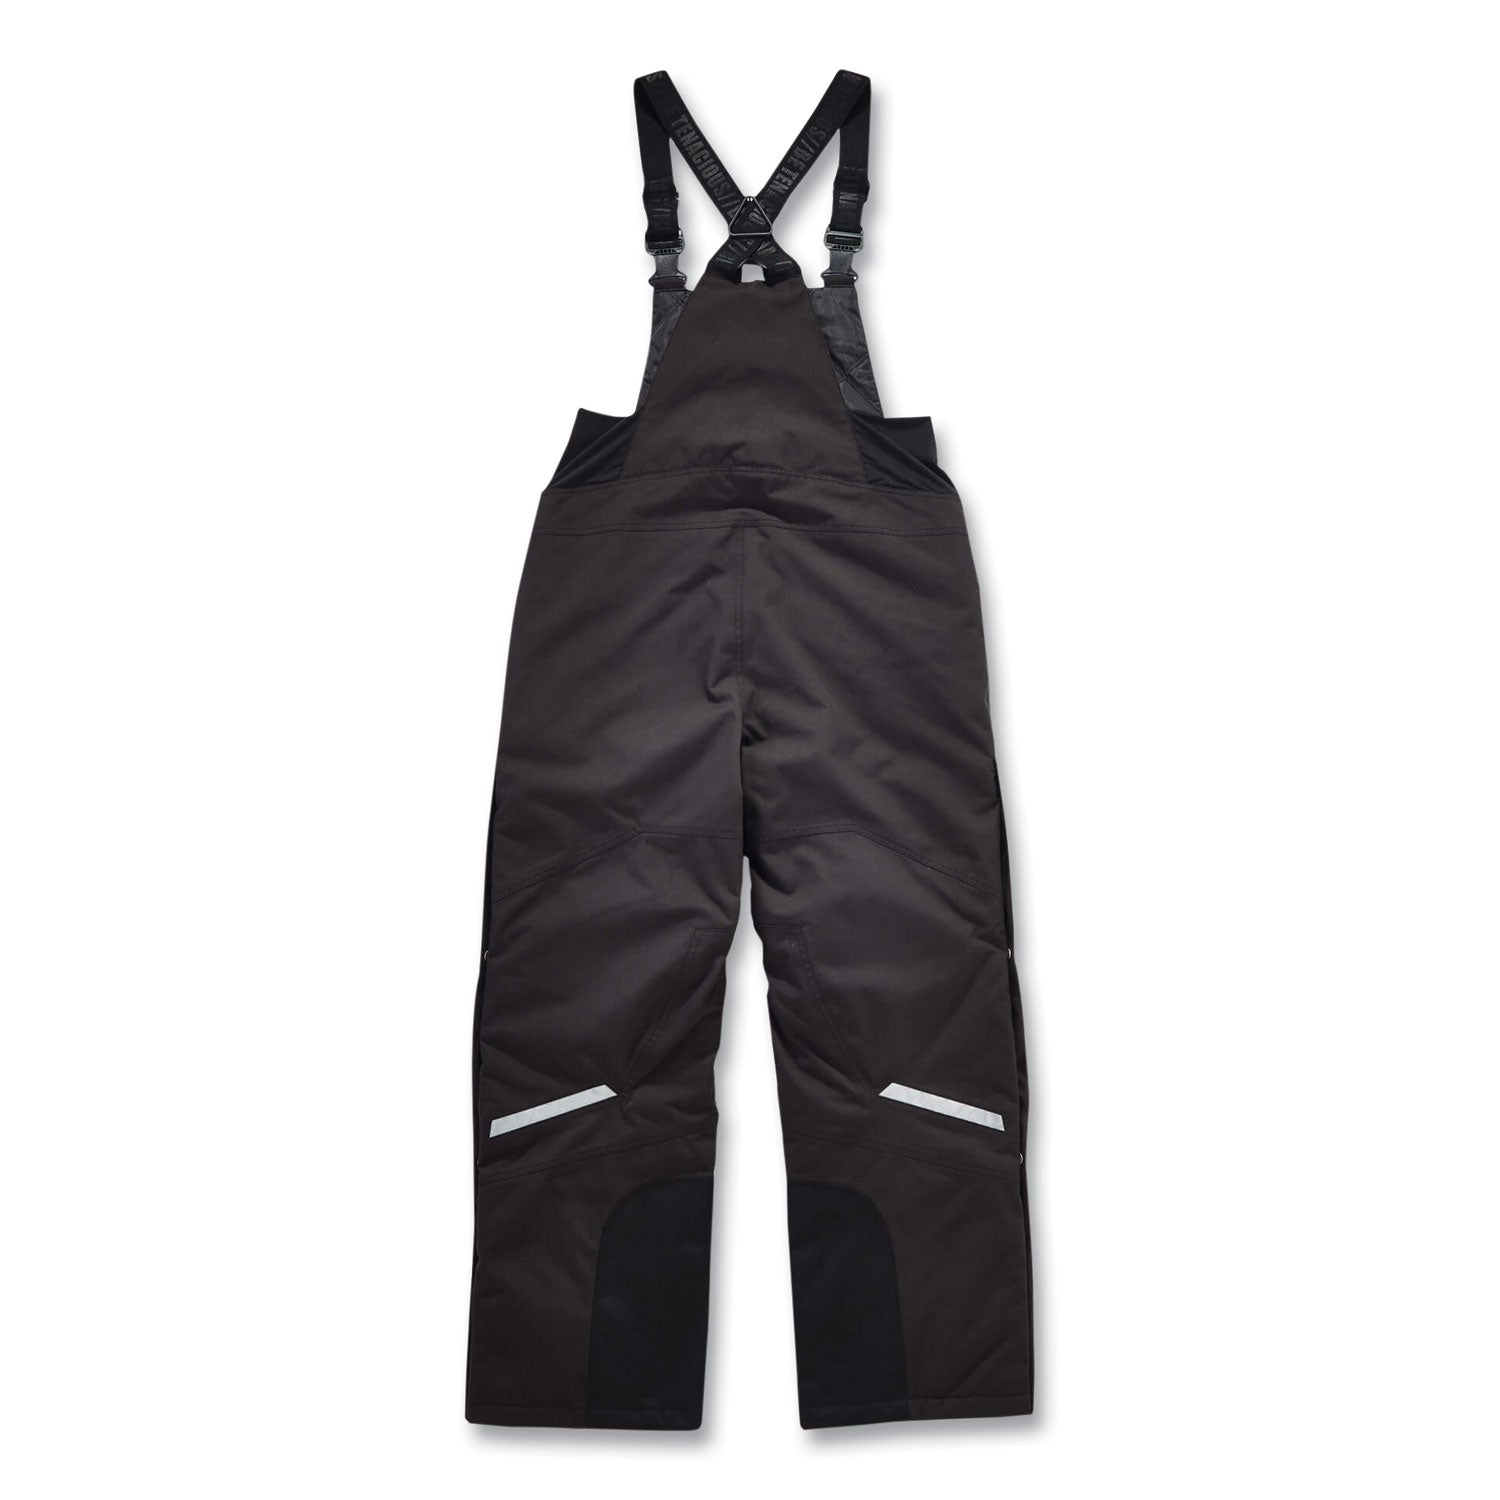 n-ferno-6471-thermal-bibs-with-500d-nylon-shell-small-black-ships-in-1-3-business-days_ego41212 - 2